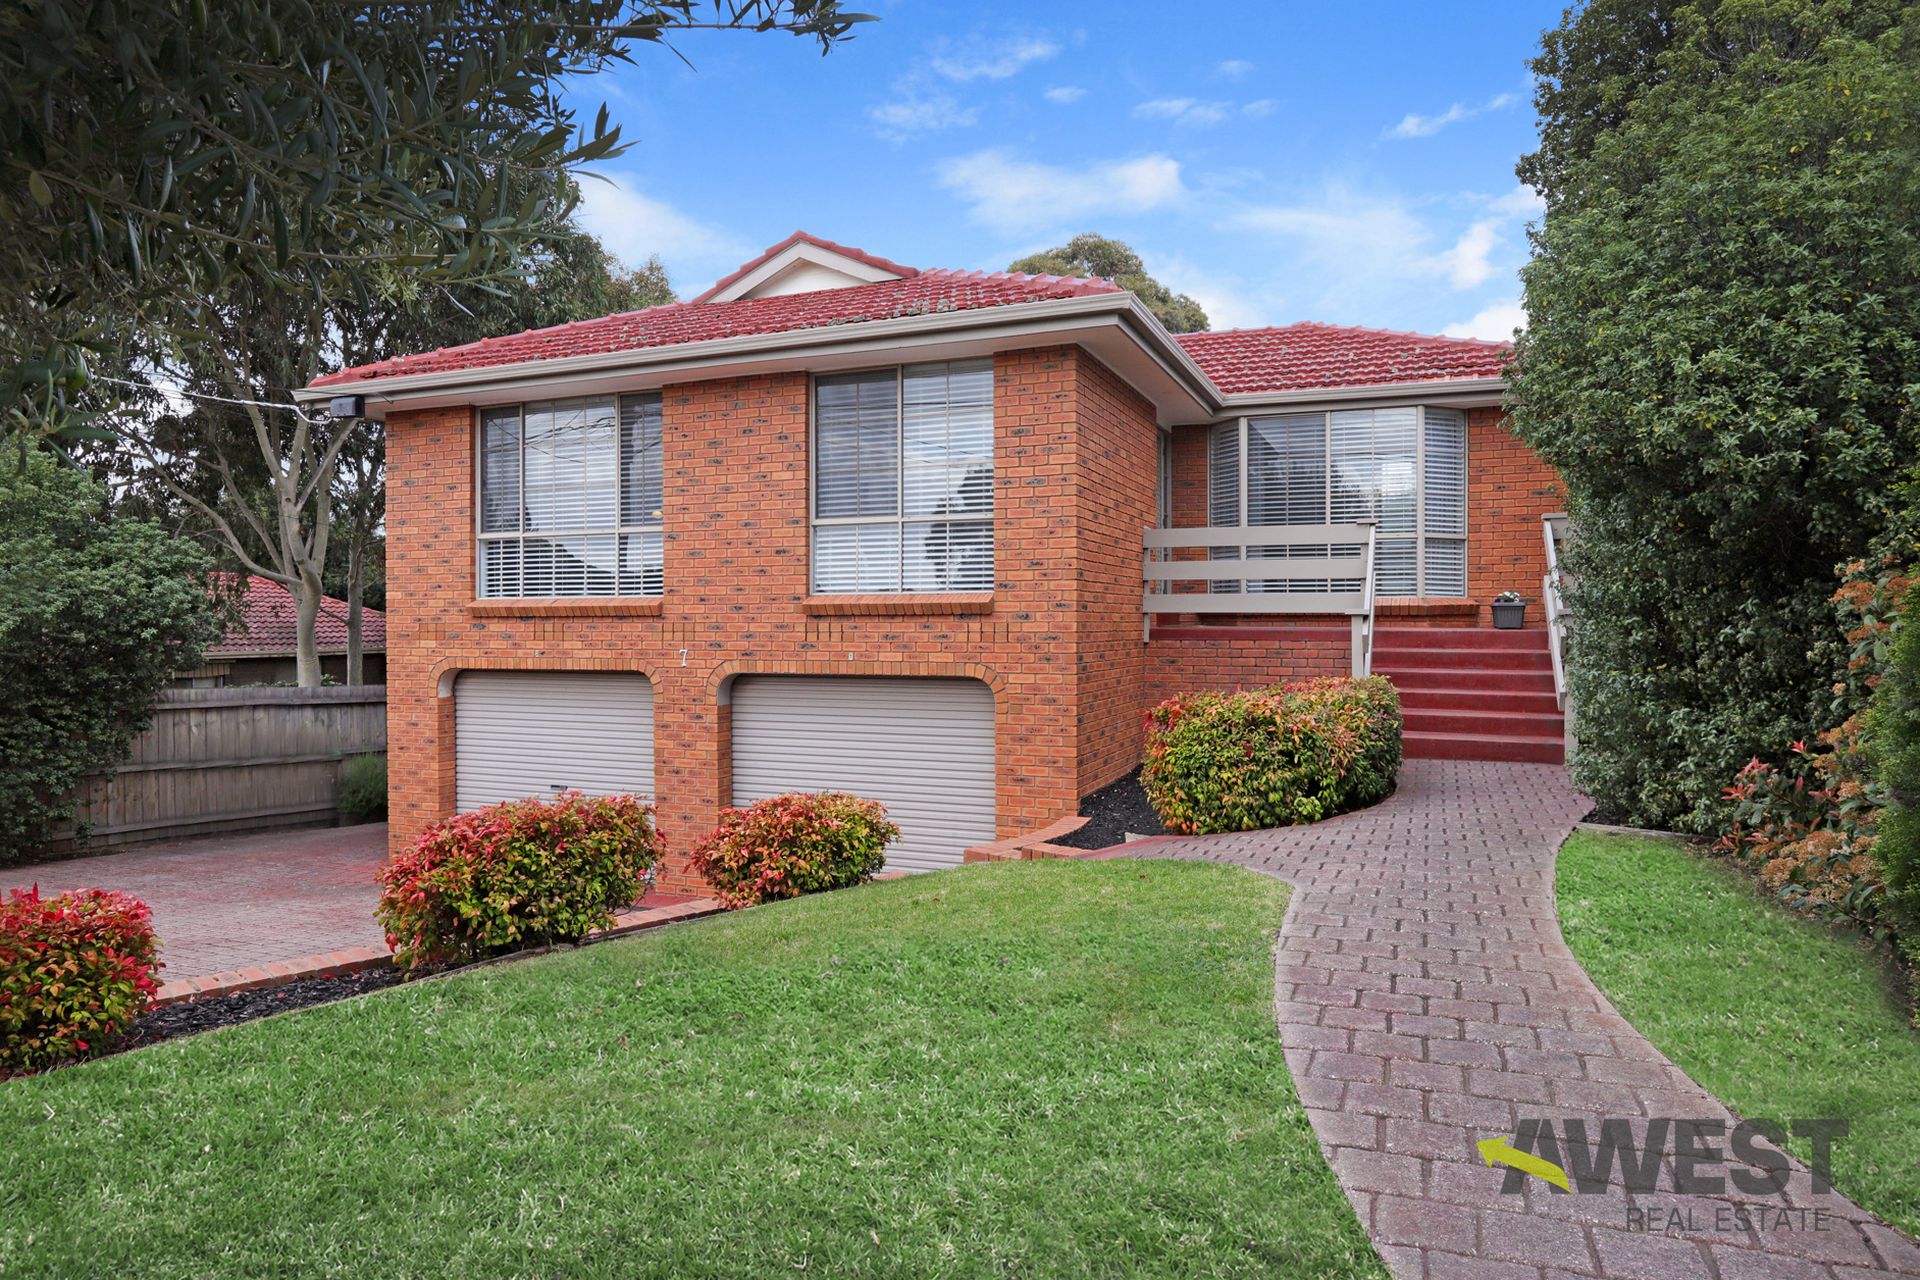 1 / 7 Roberts Road, Airport West